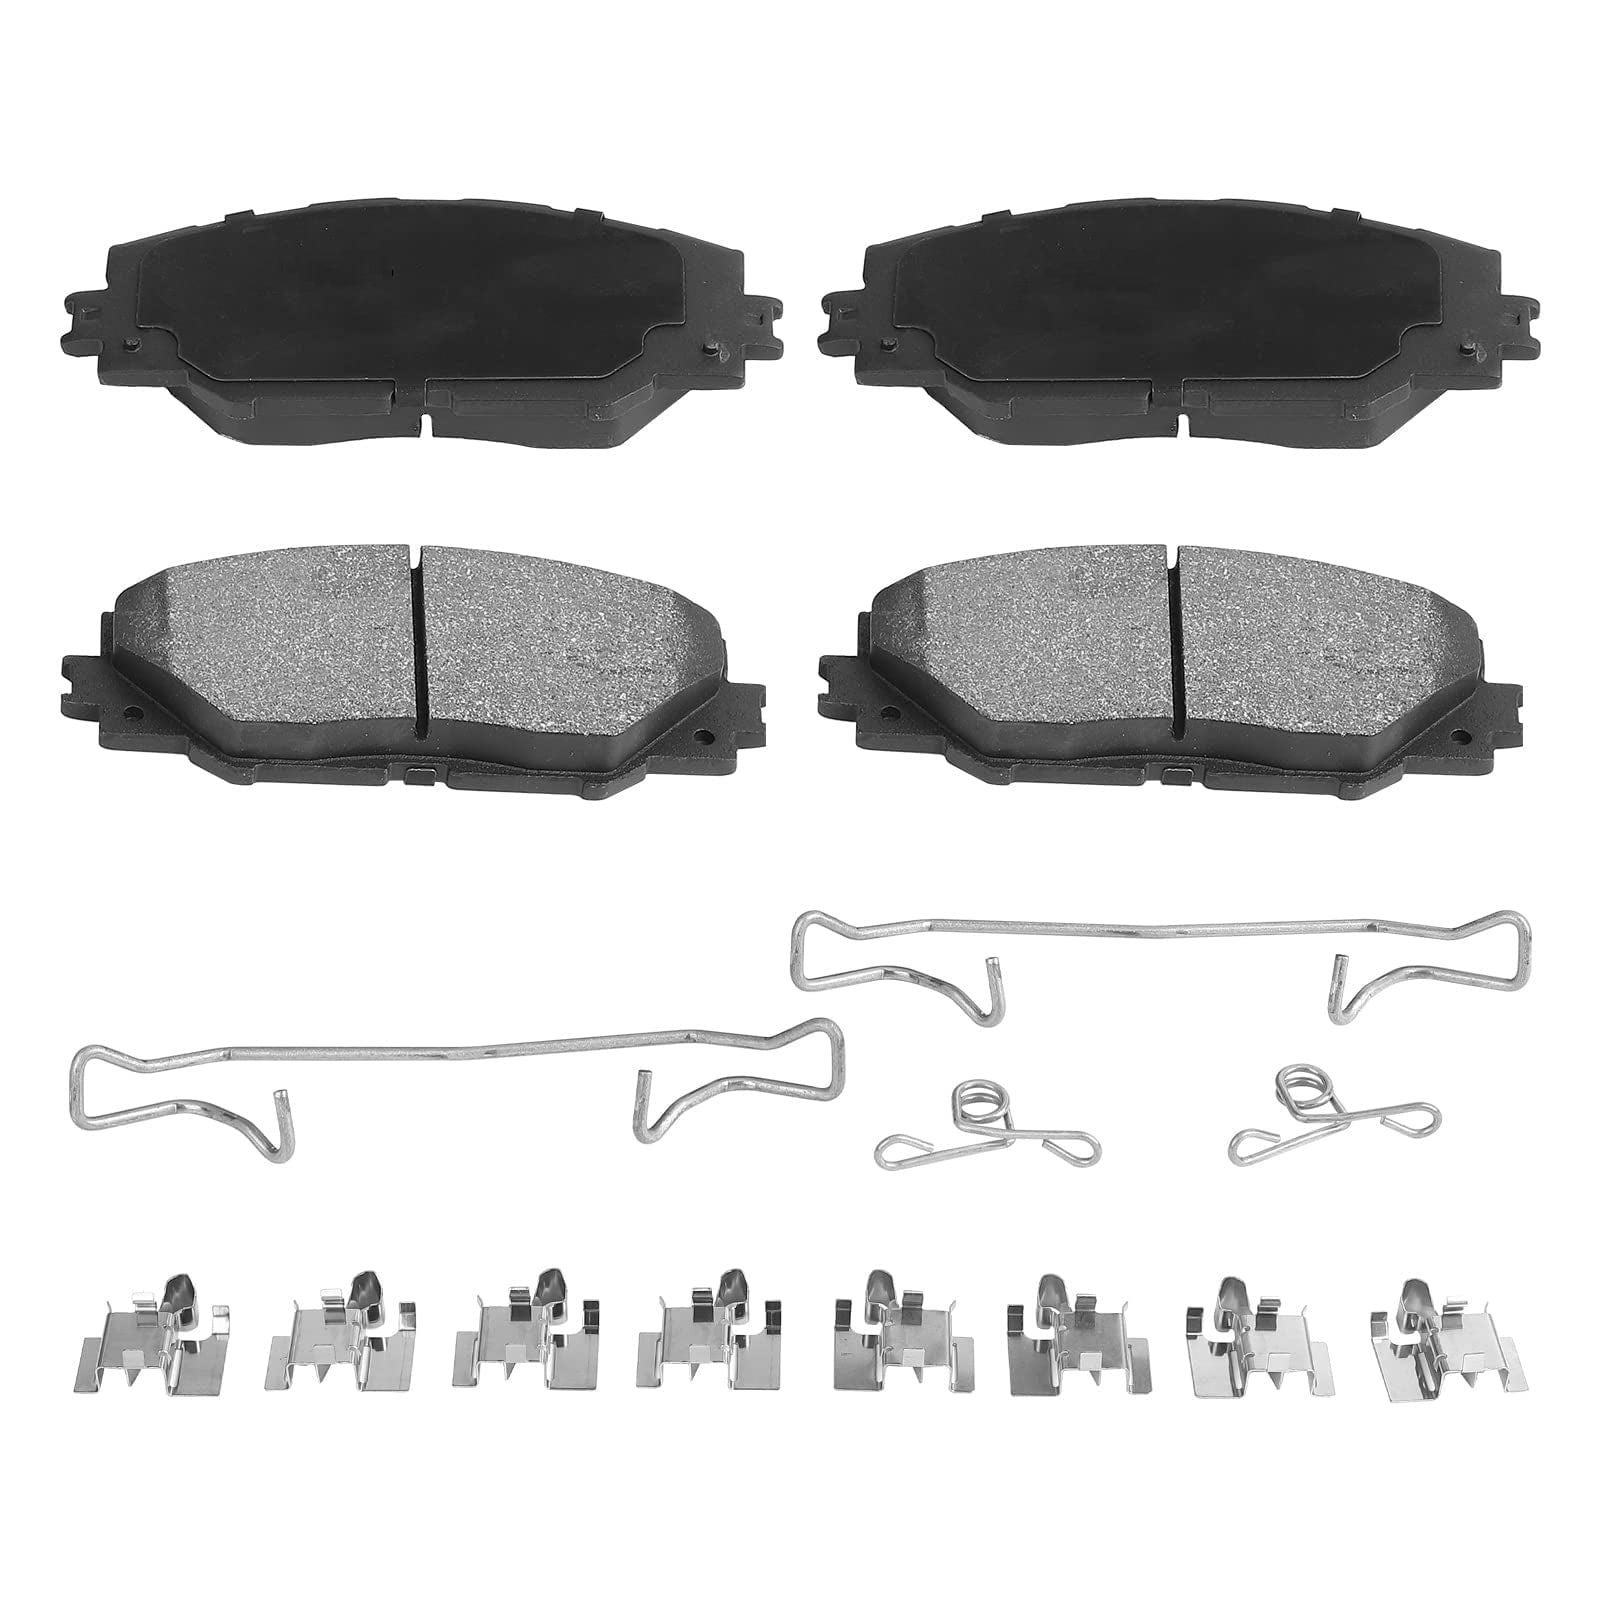 GARVEE STP0487 Ceramic Front Disc Brake Pads Replacement For 1997-1999 CL 1990-2002 Accord